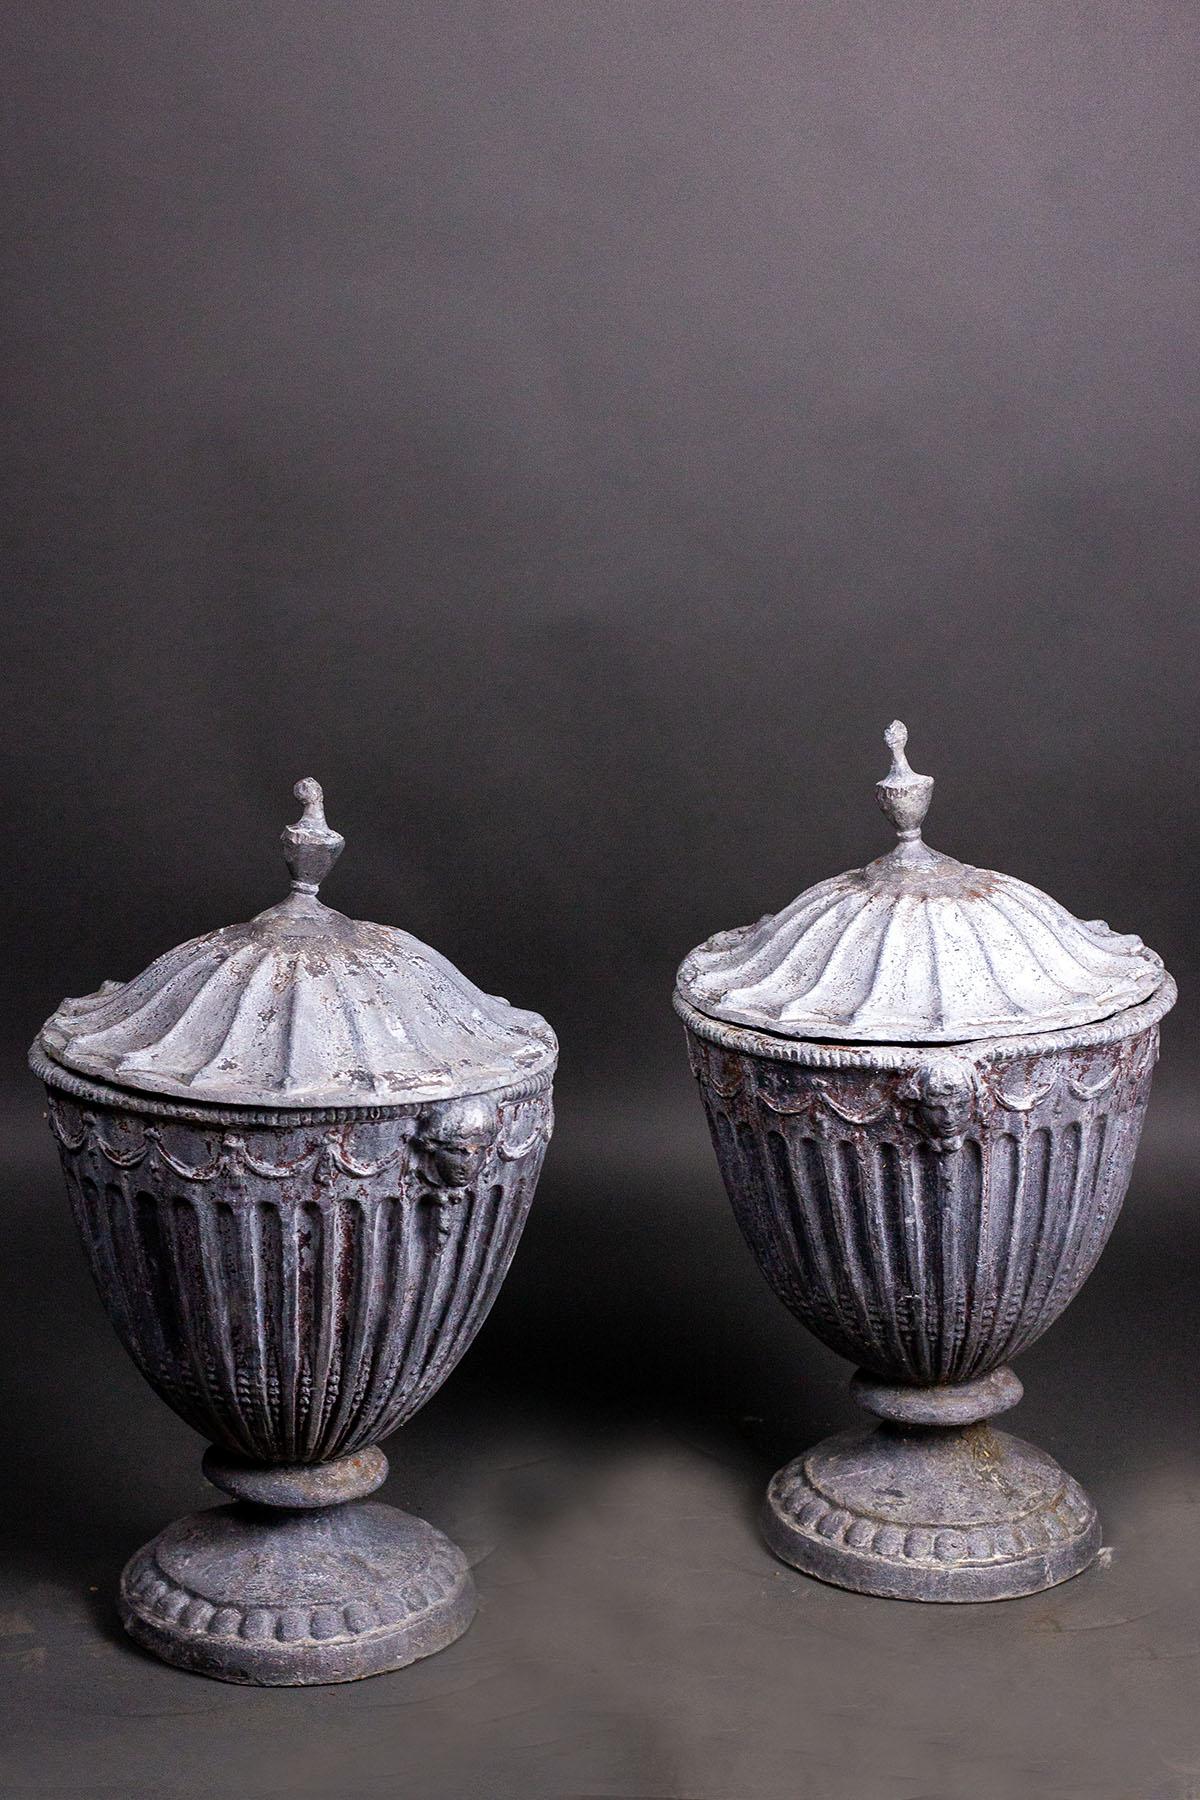 fleurdetroit offers for your consideration, a pair of 19th century, English Regency period, lead urns with removable lids. Vase forms are heavily decorated with fluting and classical garlands. Both exhibit a patina that only is manifested through